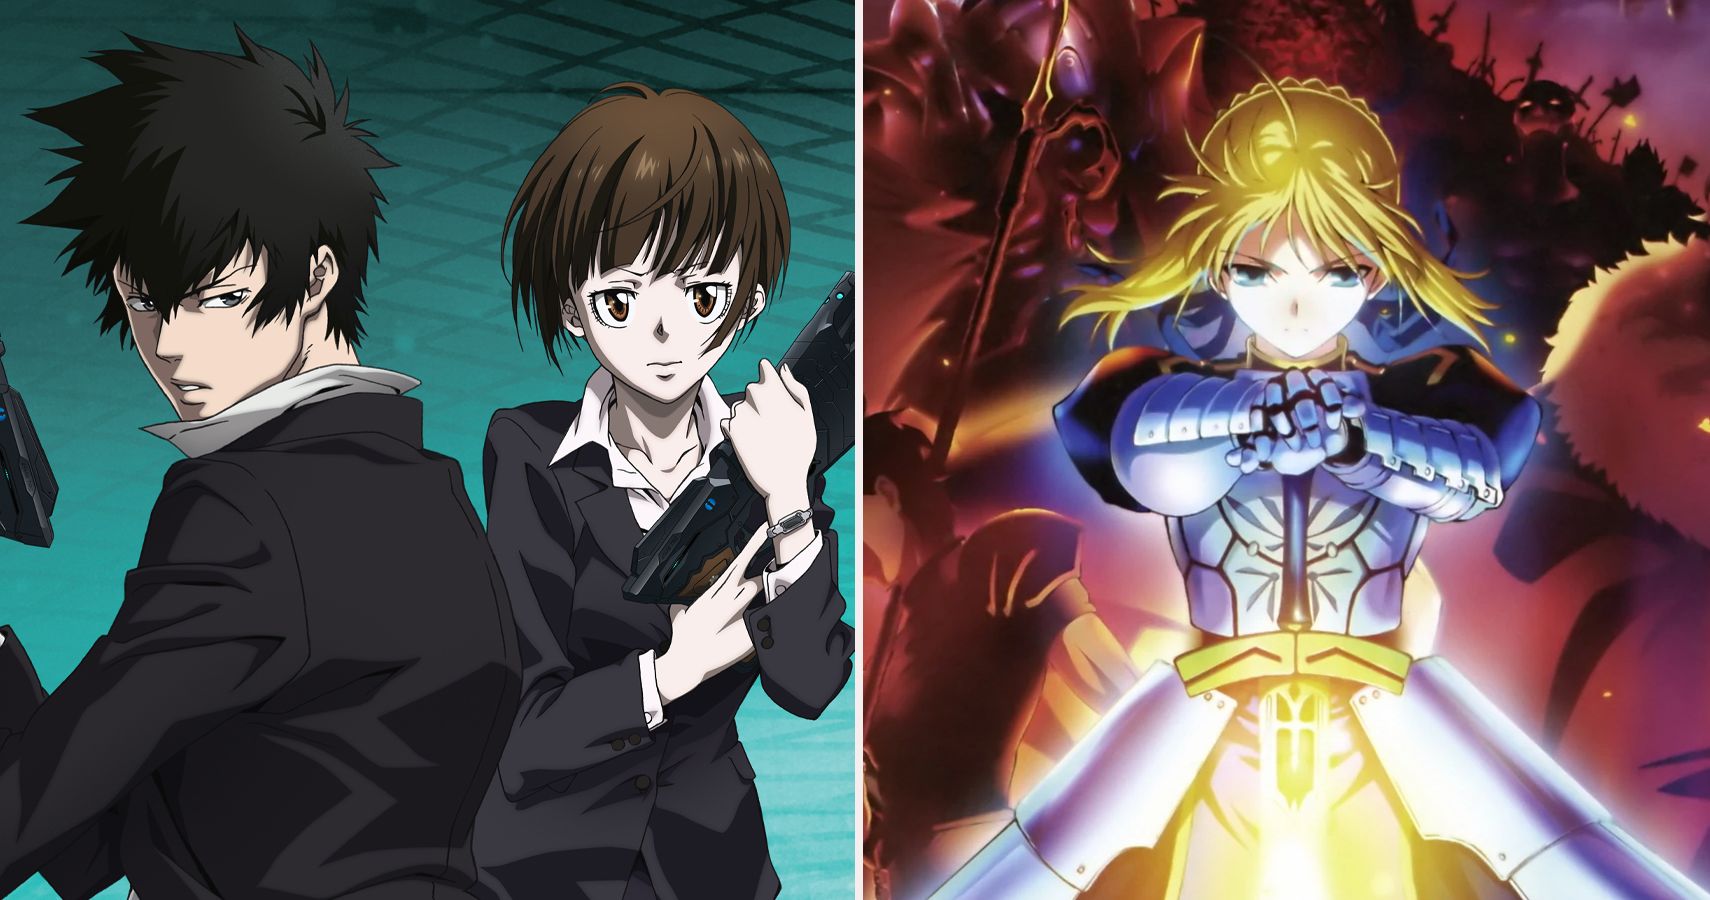 From Death Note to Erased: Top 10 short anime series for beginners